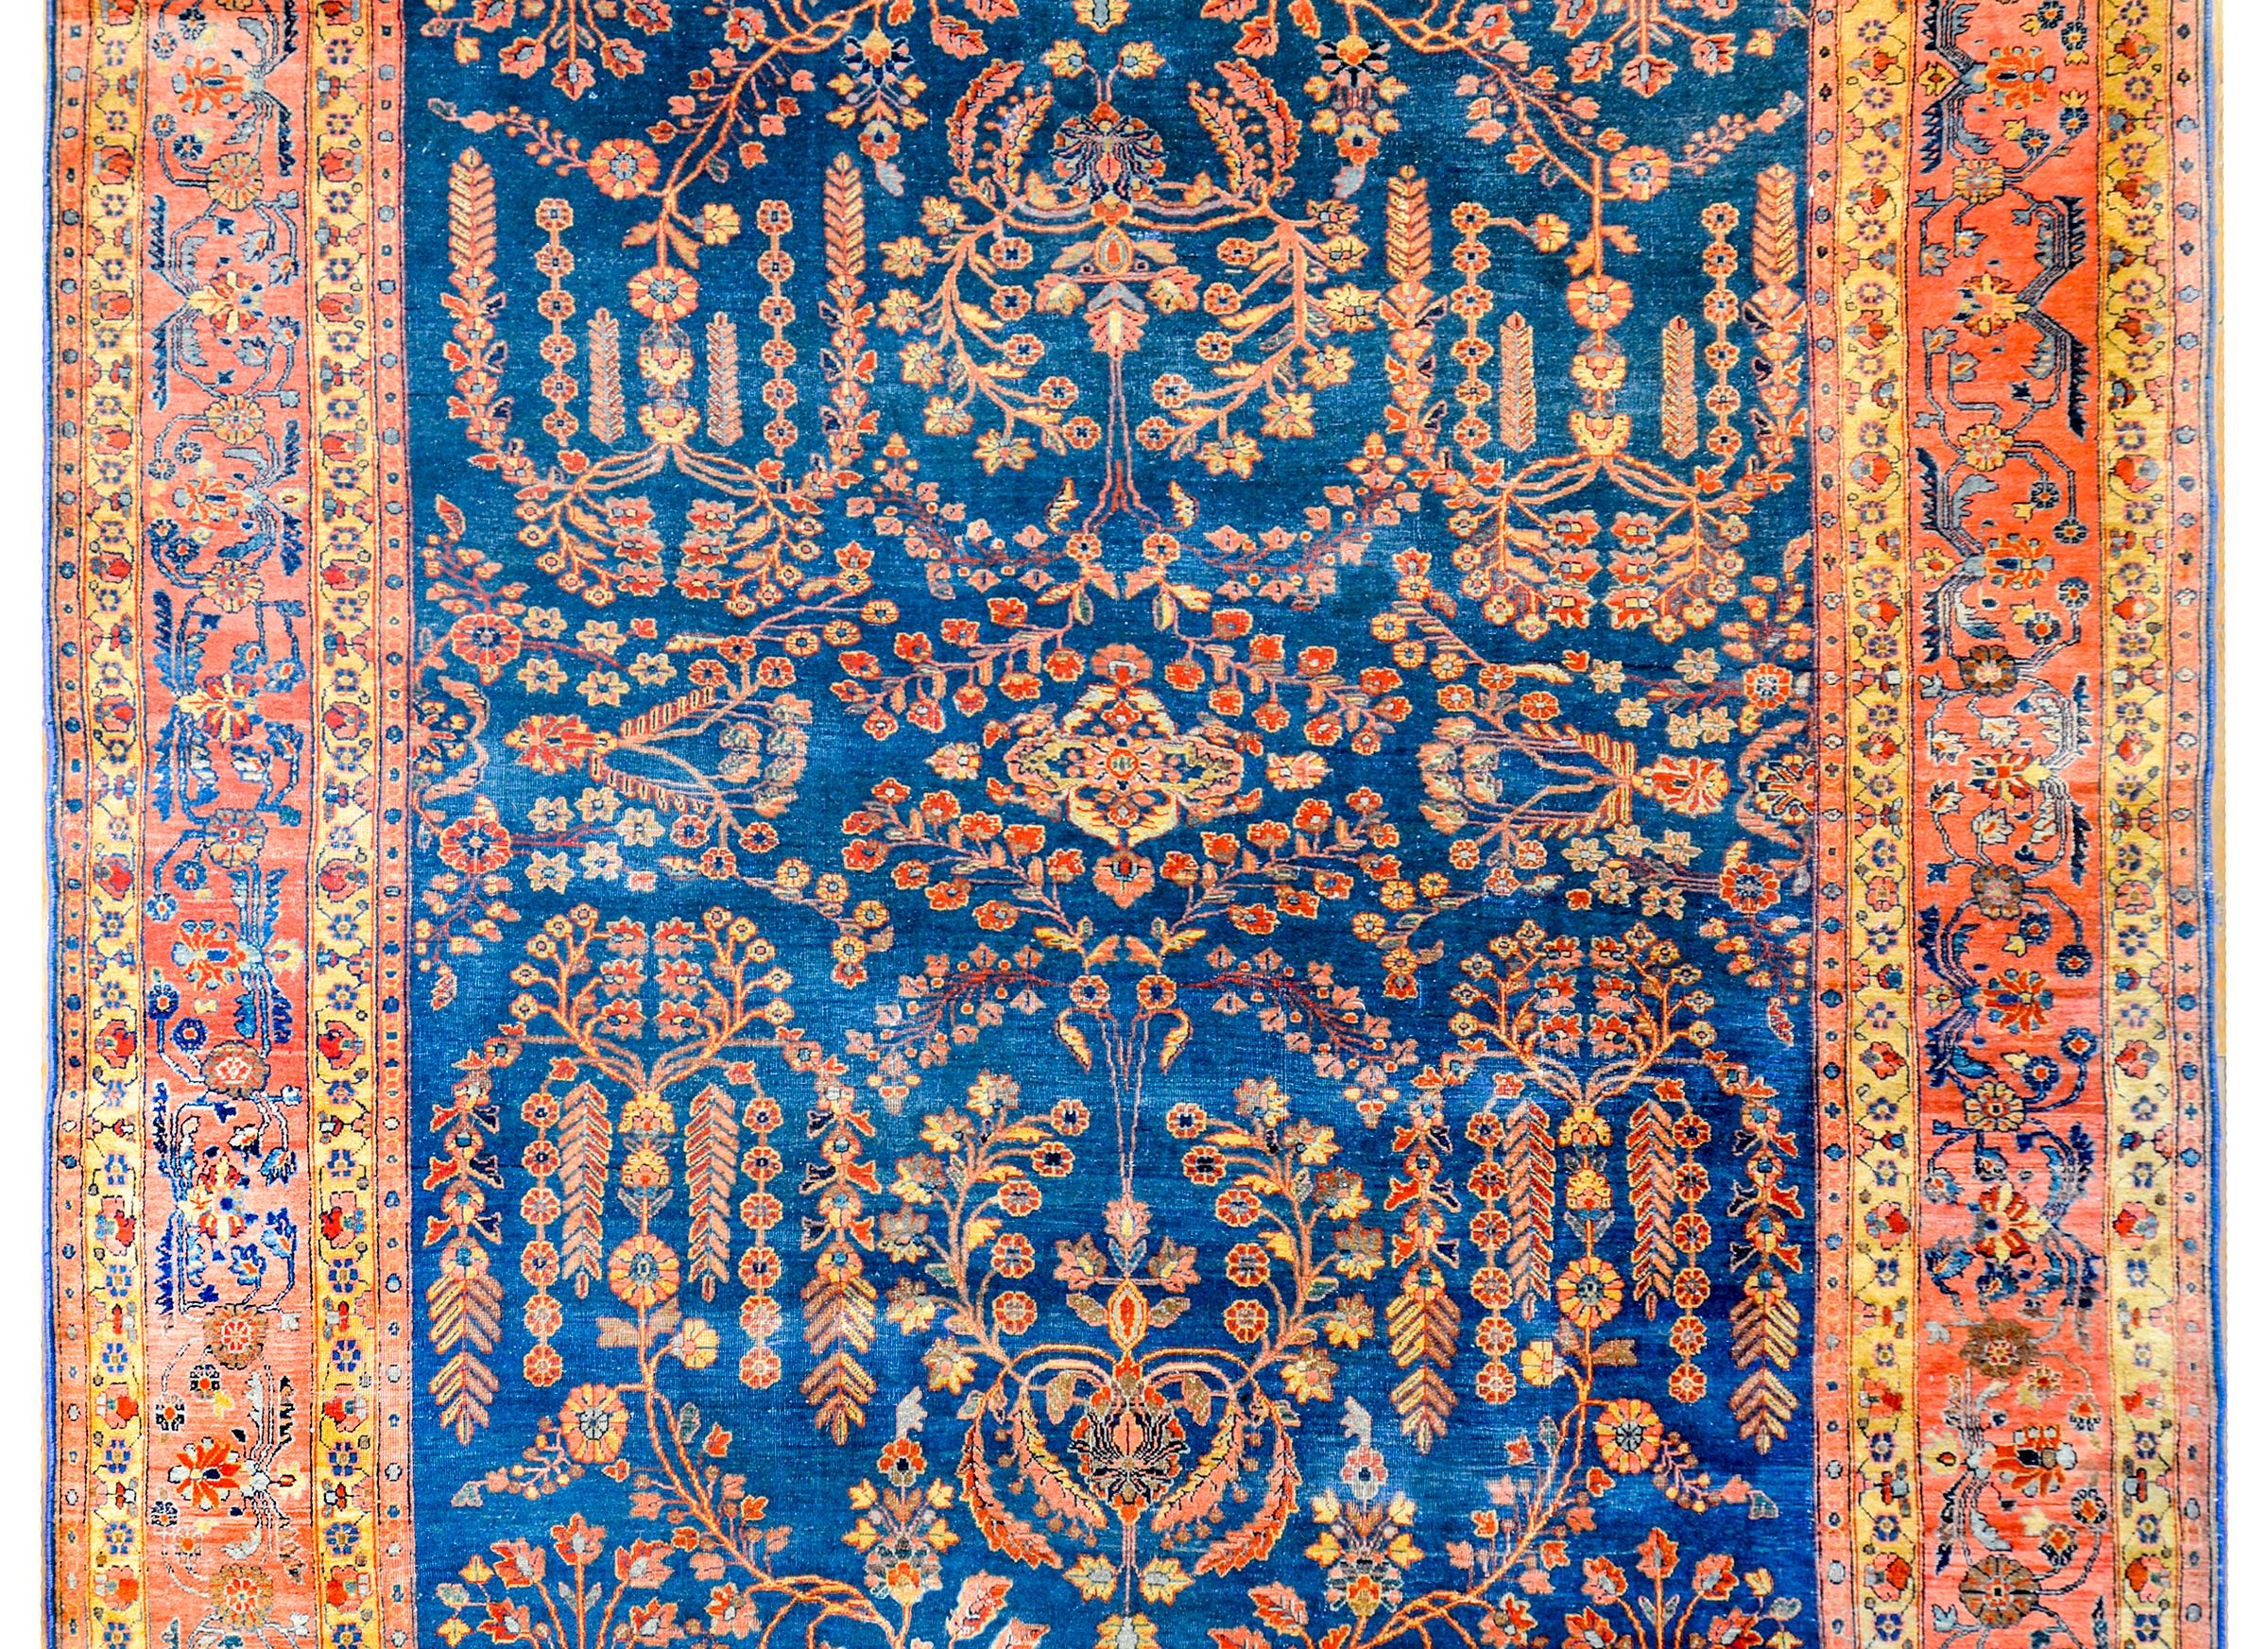 An outstanding early 20th century Persian Sarouk rug with a beautiful mirrored tree-of-life pattern woven in crimson, gold, and pink, in a rich indigo background. The border is gorgeous, with a wonderful scrolling leaf, vine, and floral pattern on a